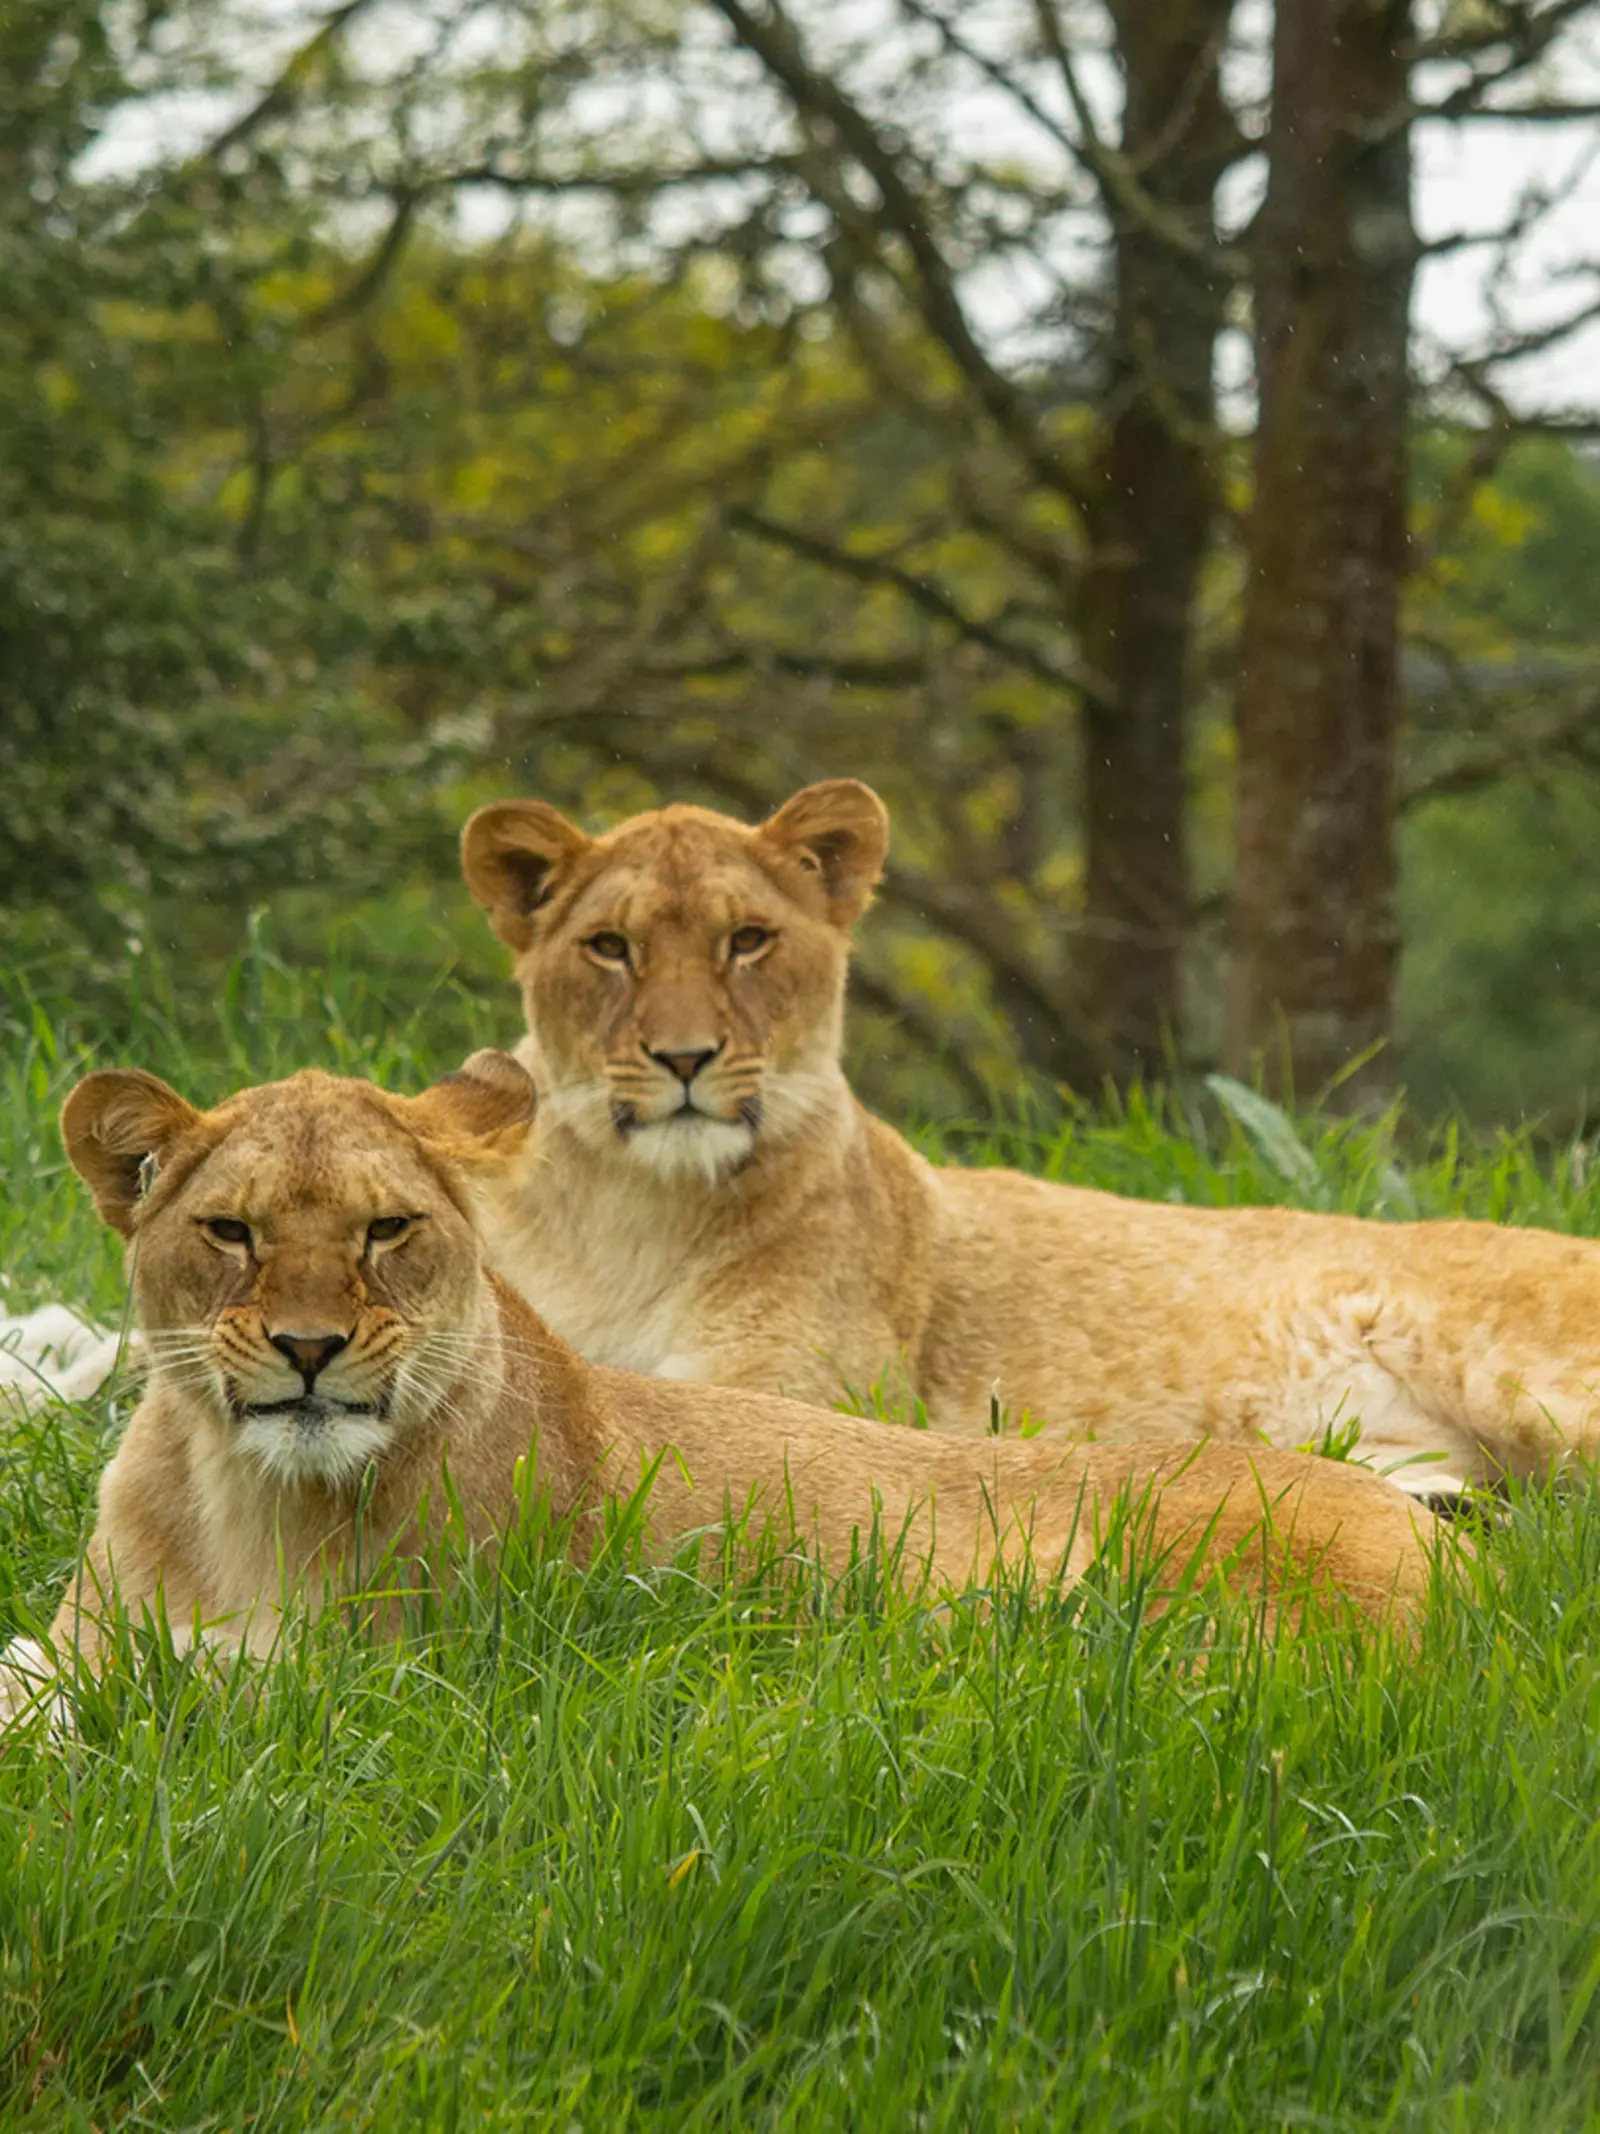 Lionesses Waka and Winta at Whipsnade Zoo